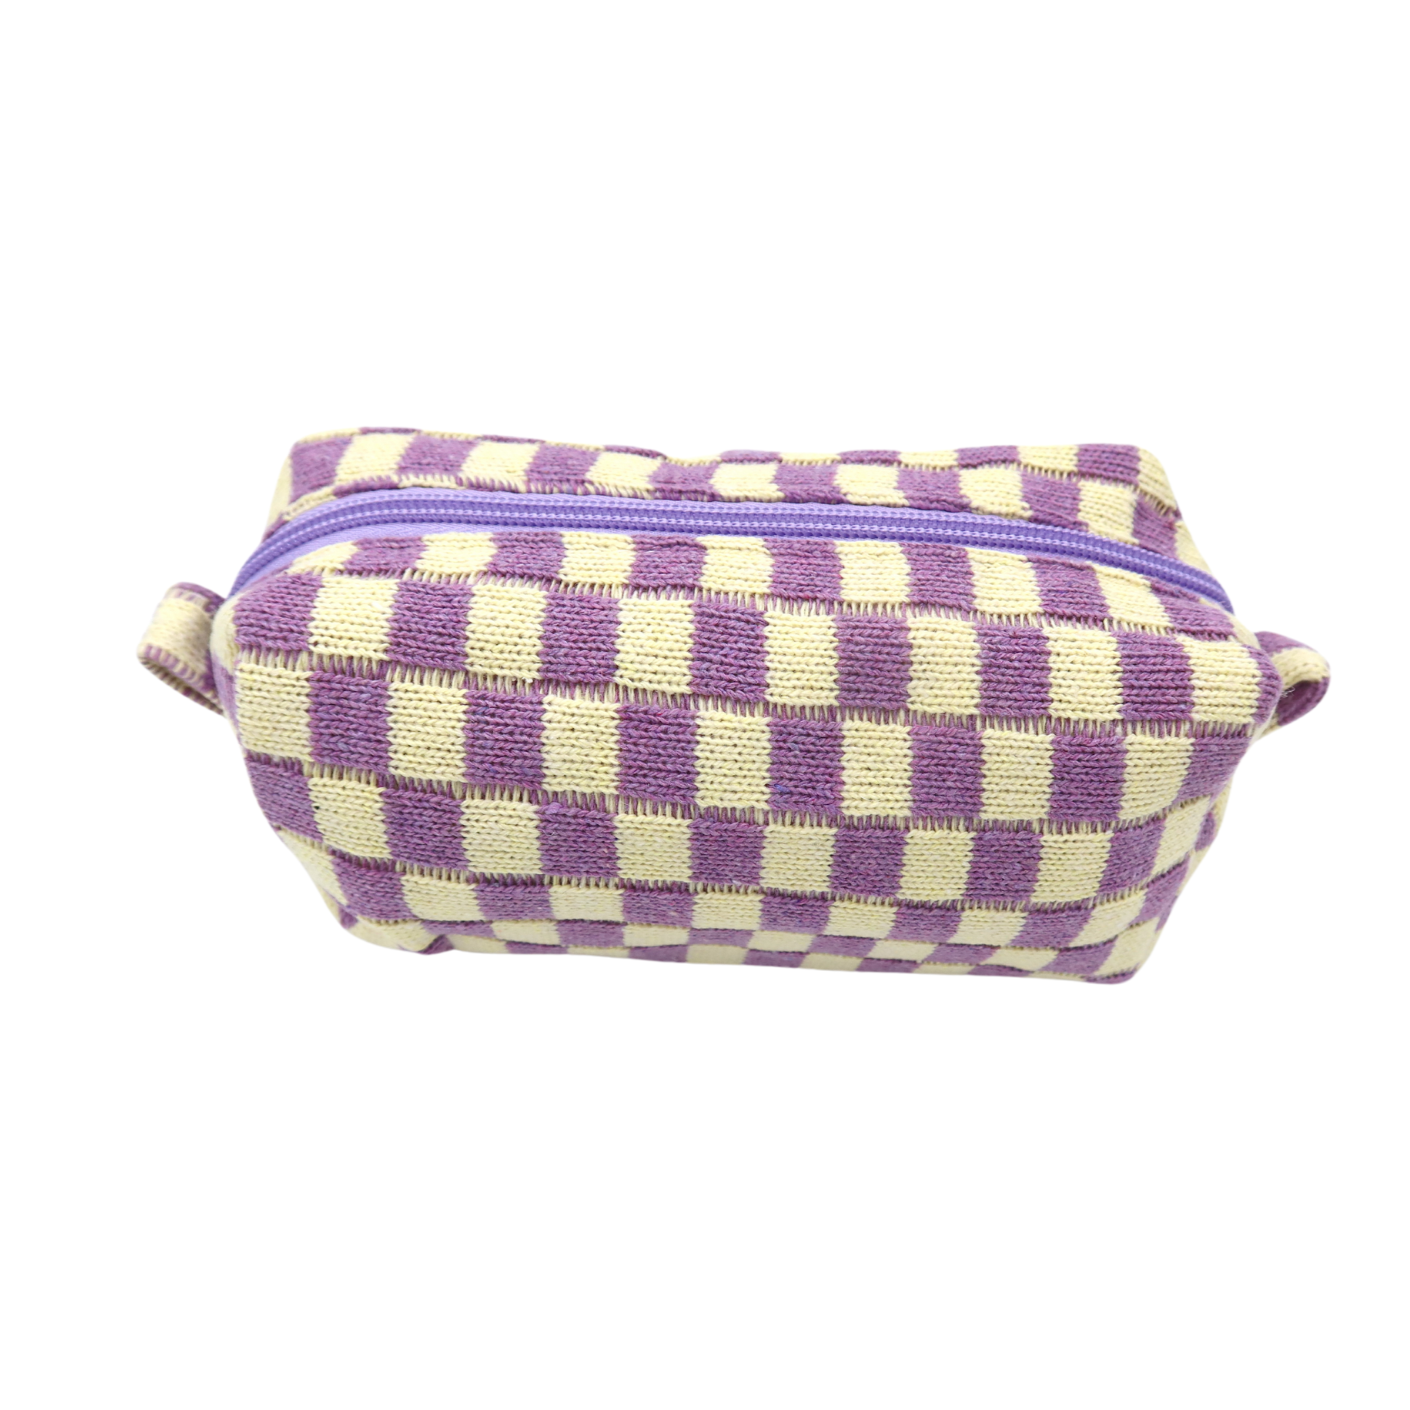 purple and cream checkered toiletry pouch with zipper top